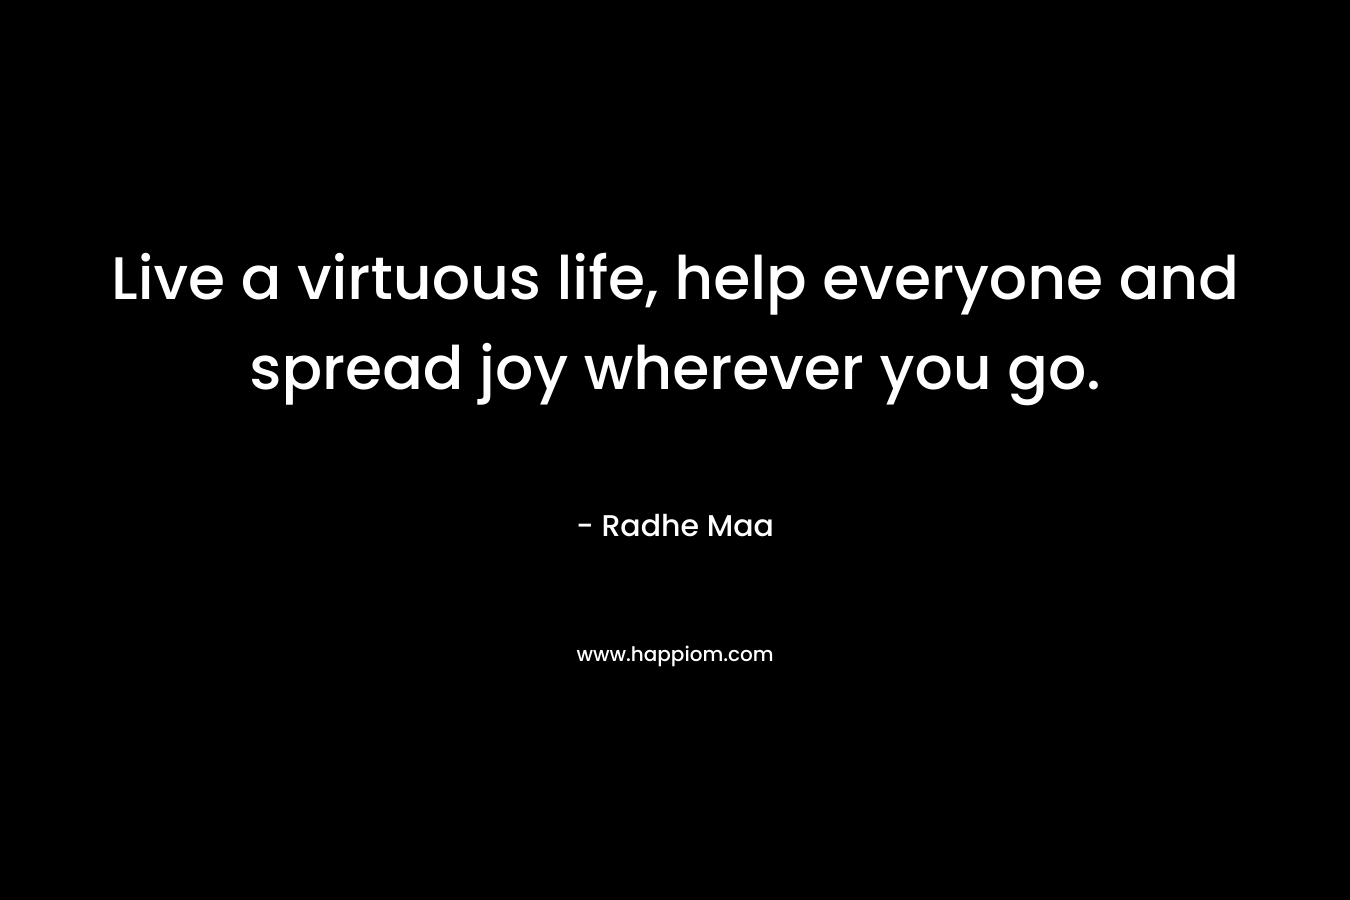 Live a virtuous life, help everyone and spread joy wherever you go.